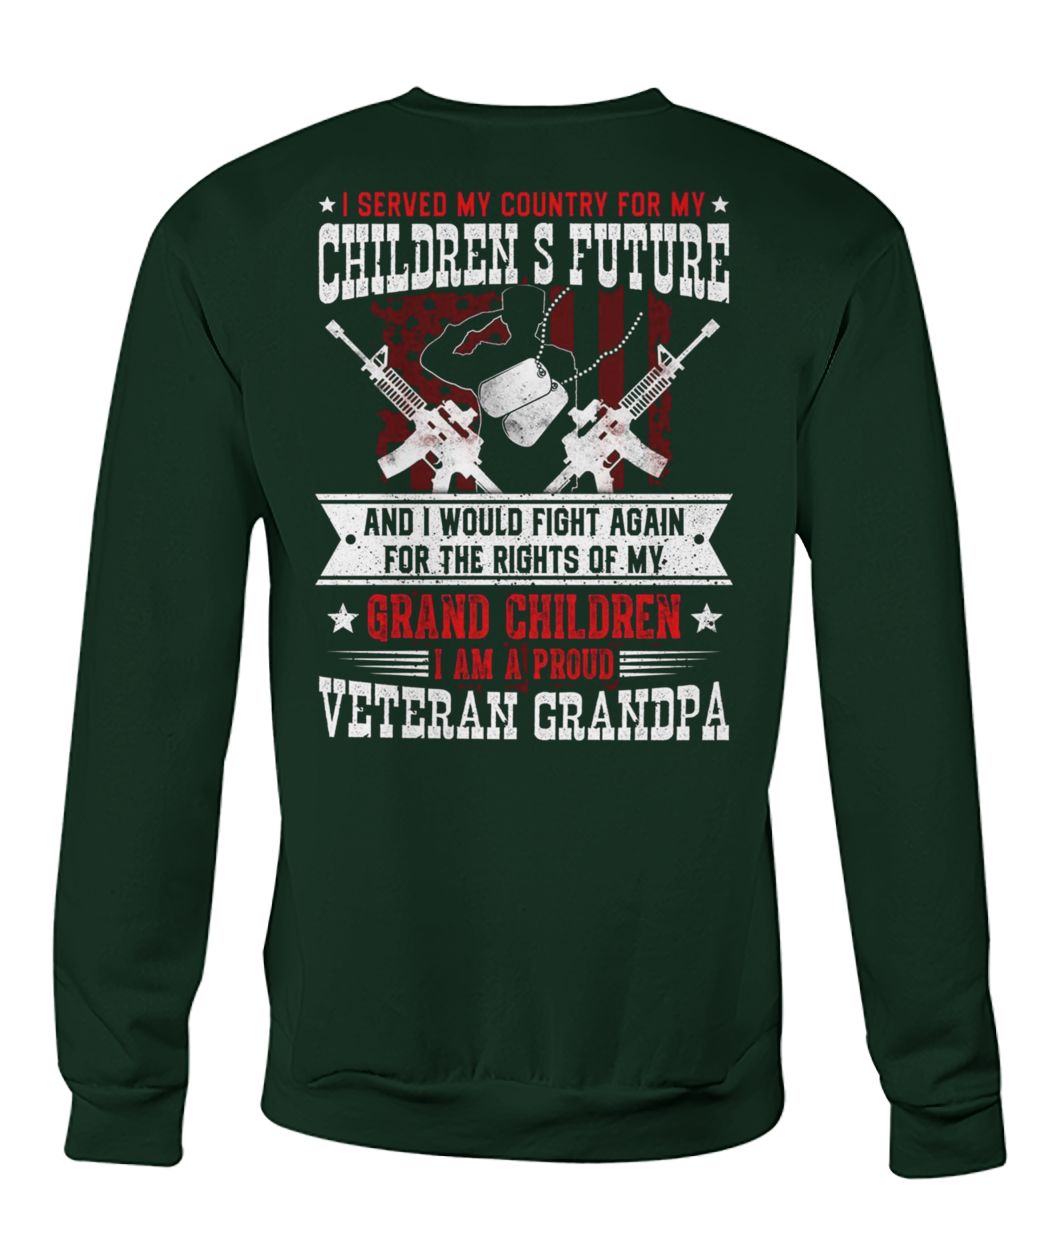 I served my country for my children's future and I would fight again crew neck sweatshirt